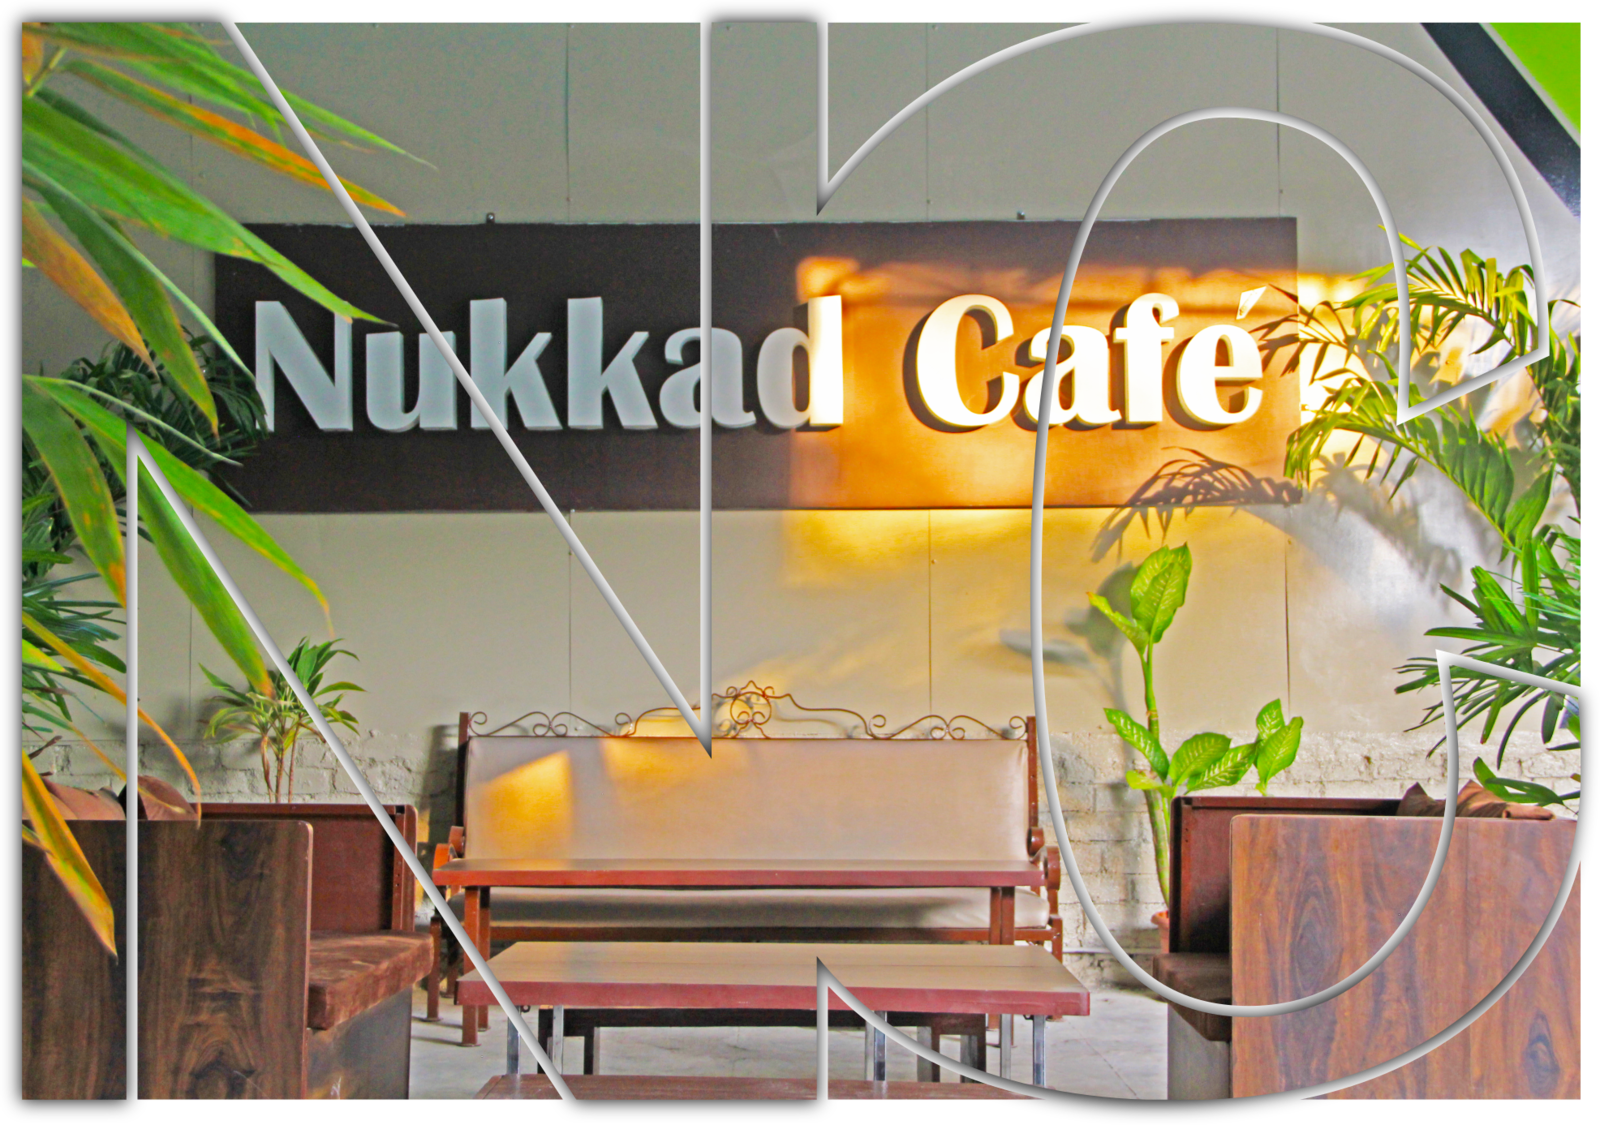 Nukkad cafe cospace available facility like electricity, food and wifi.